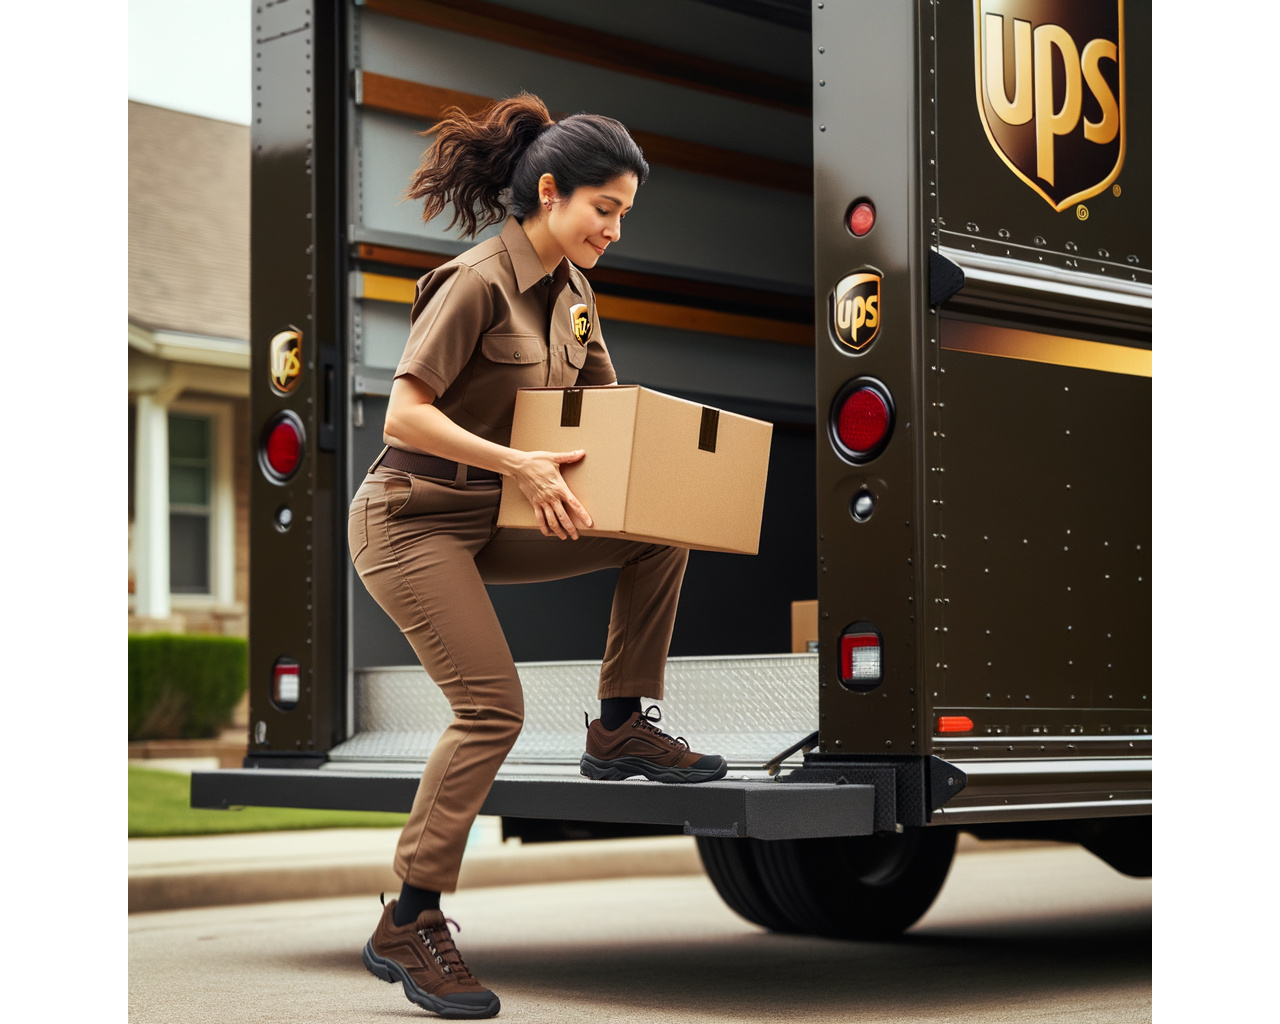 Artificial intelligence allows UPS to fire 12,000 managers without ever having to rehire them. The company is also making other radical changes, such 